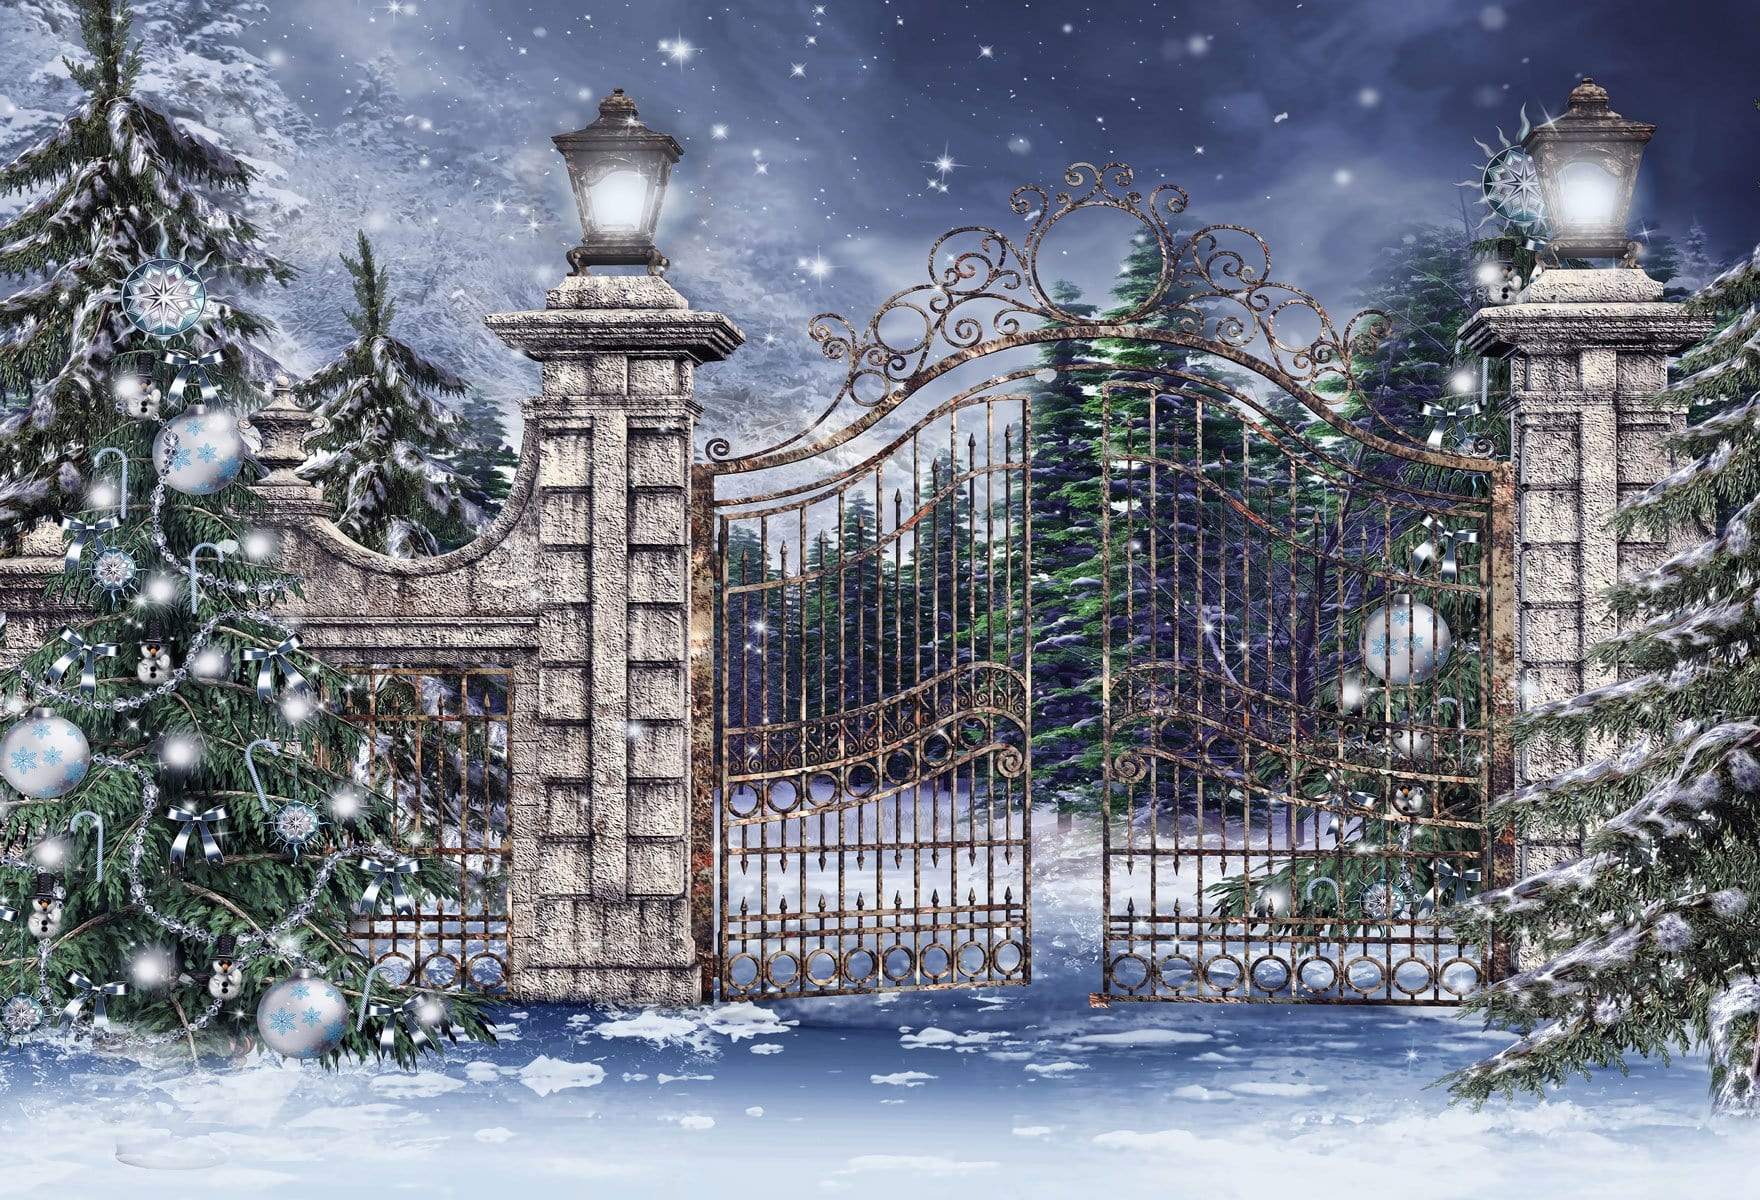 Katebackdrop£ºKate Gate and Christmas Tree With Snow For Photography